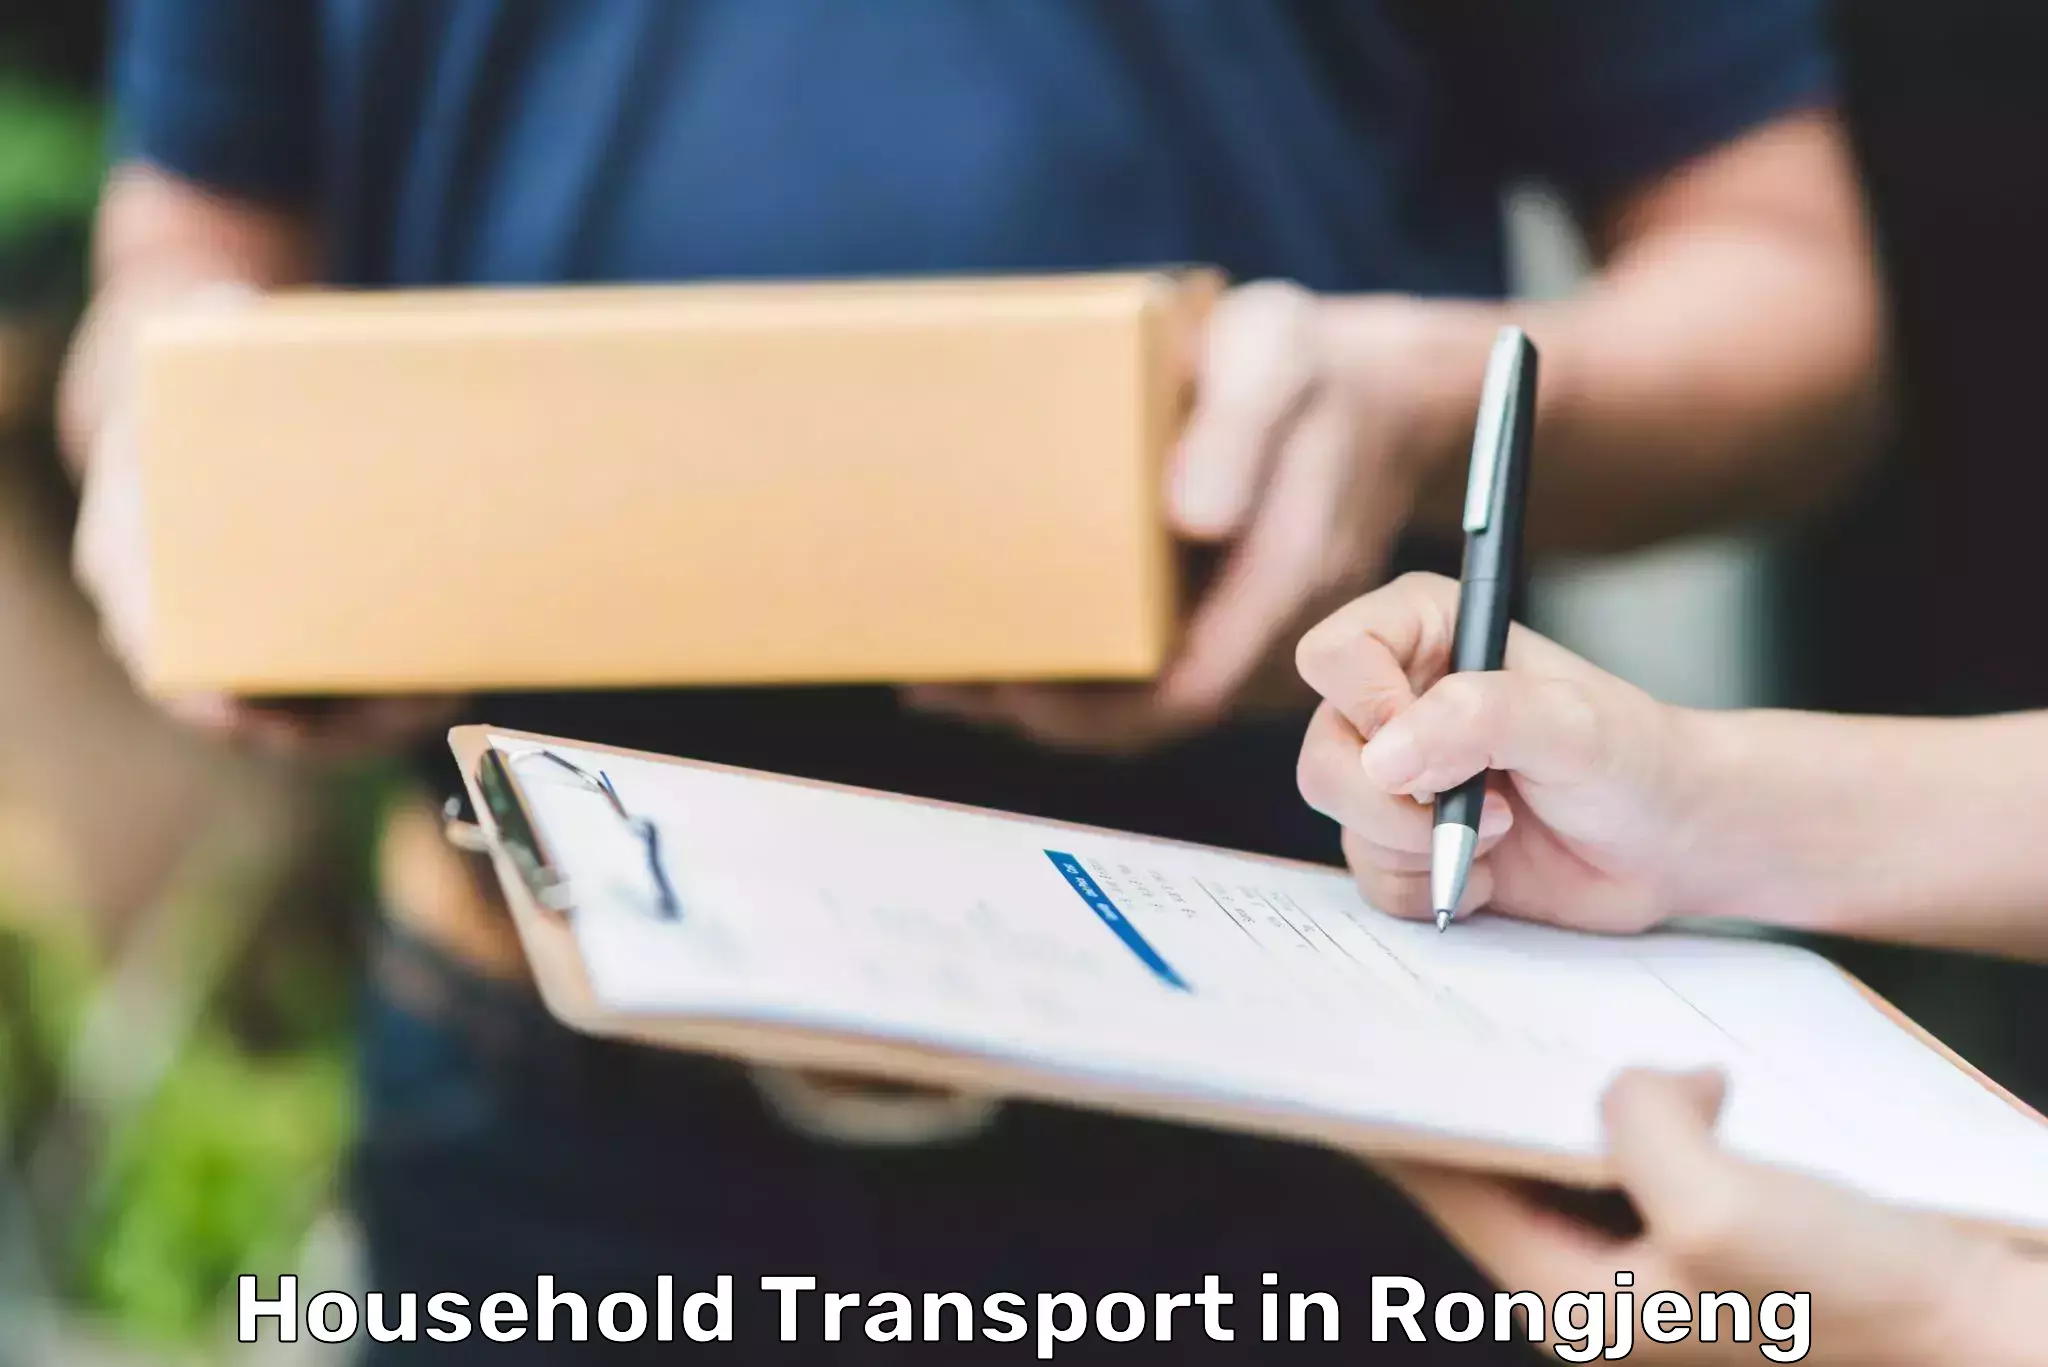 Furniture transport and logistics in Rongjeng